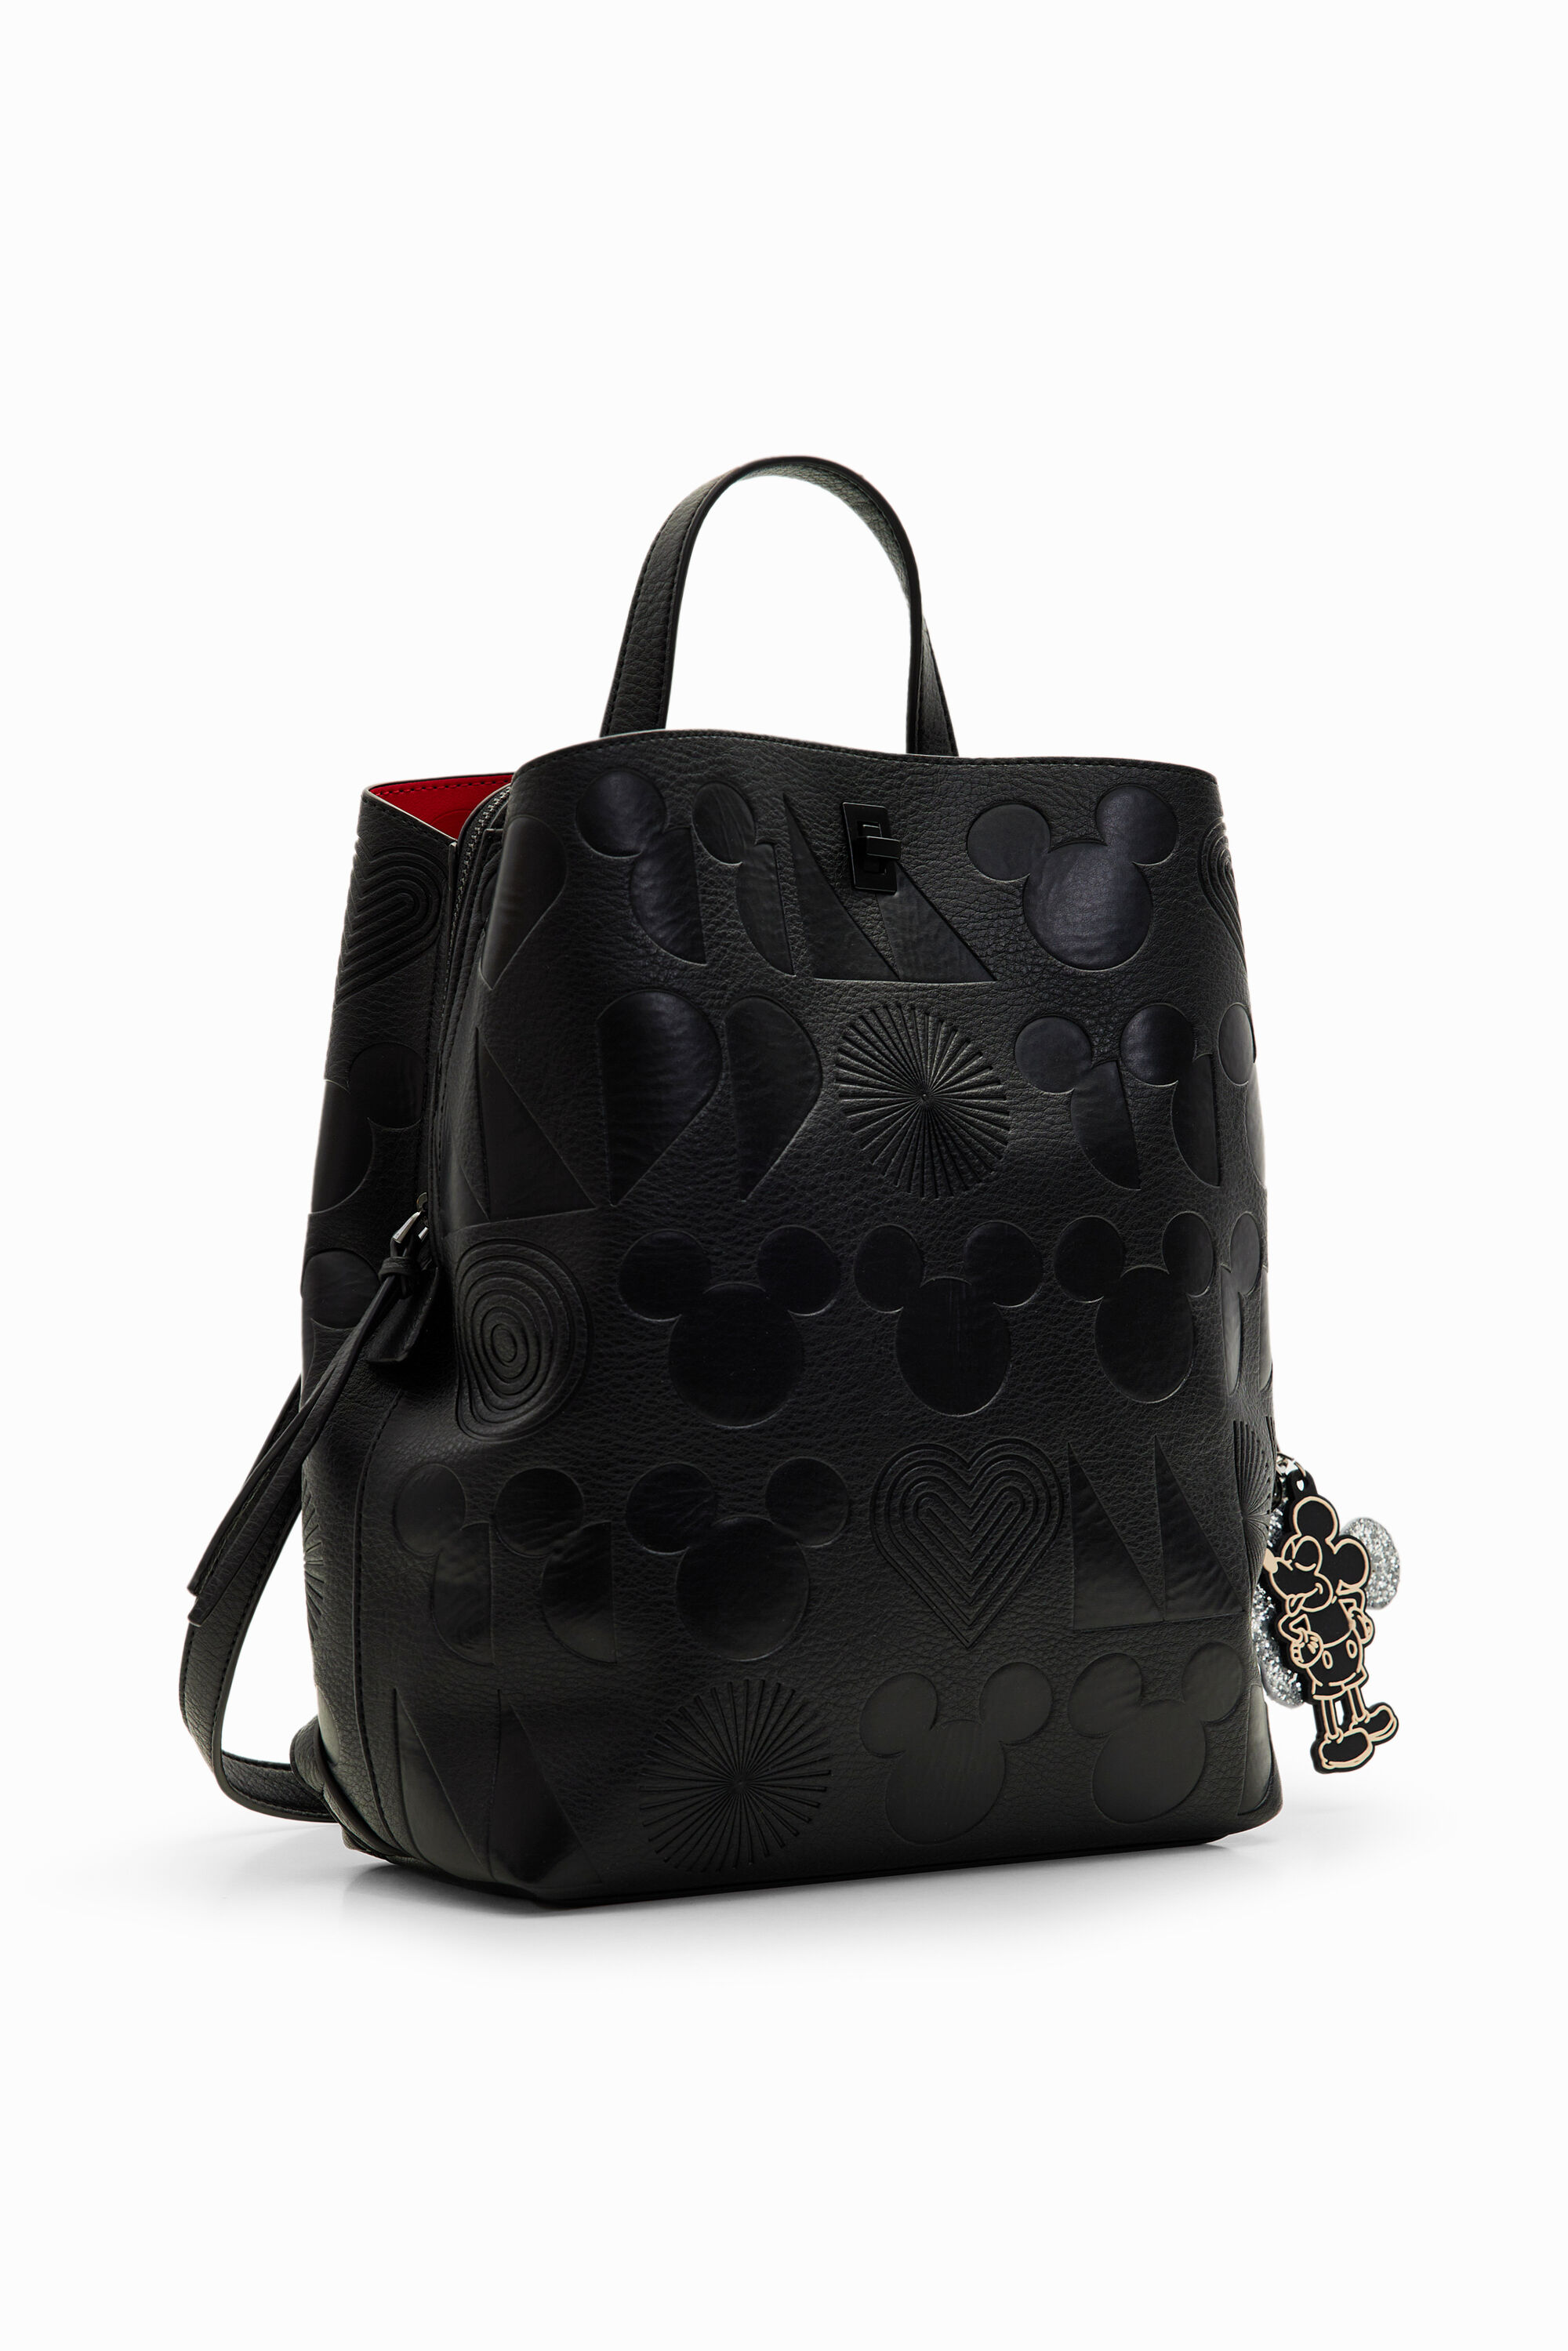 Desigual M Mickey Mouse Backpack In Black